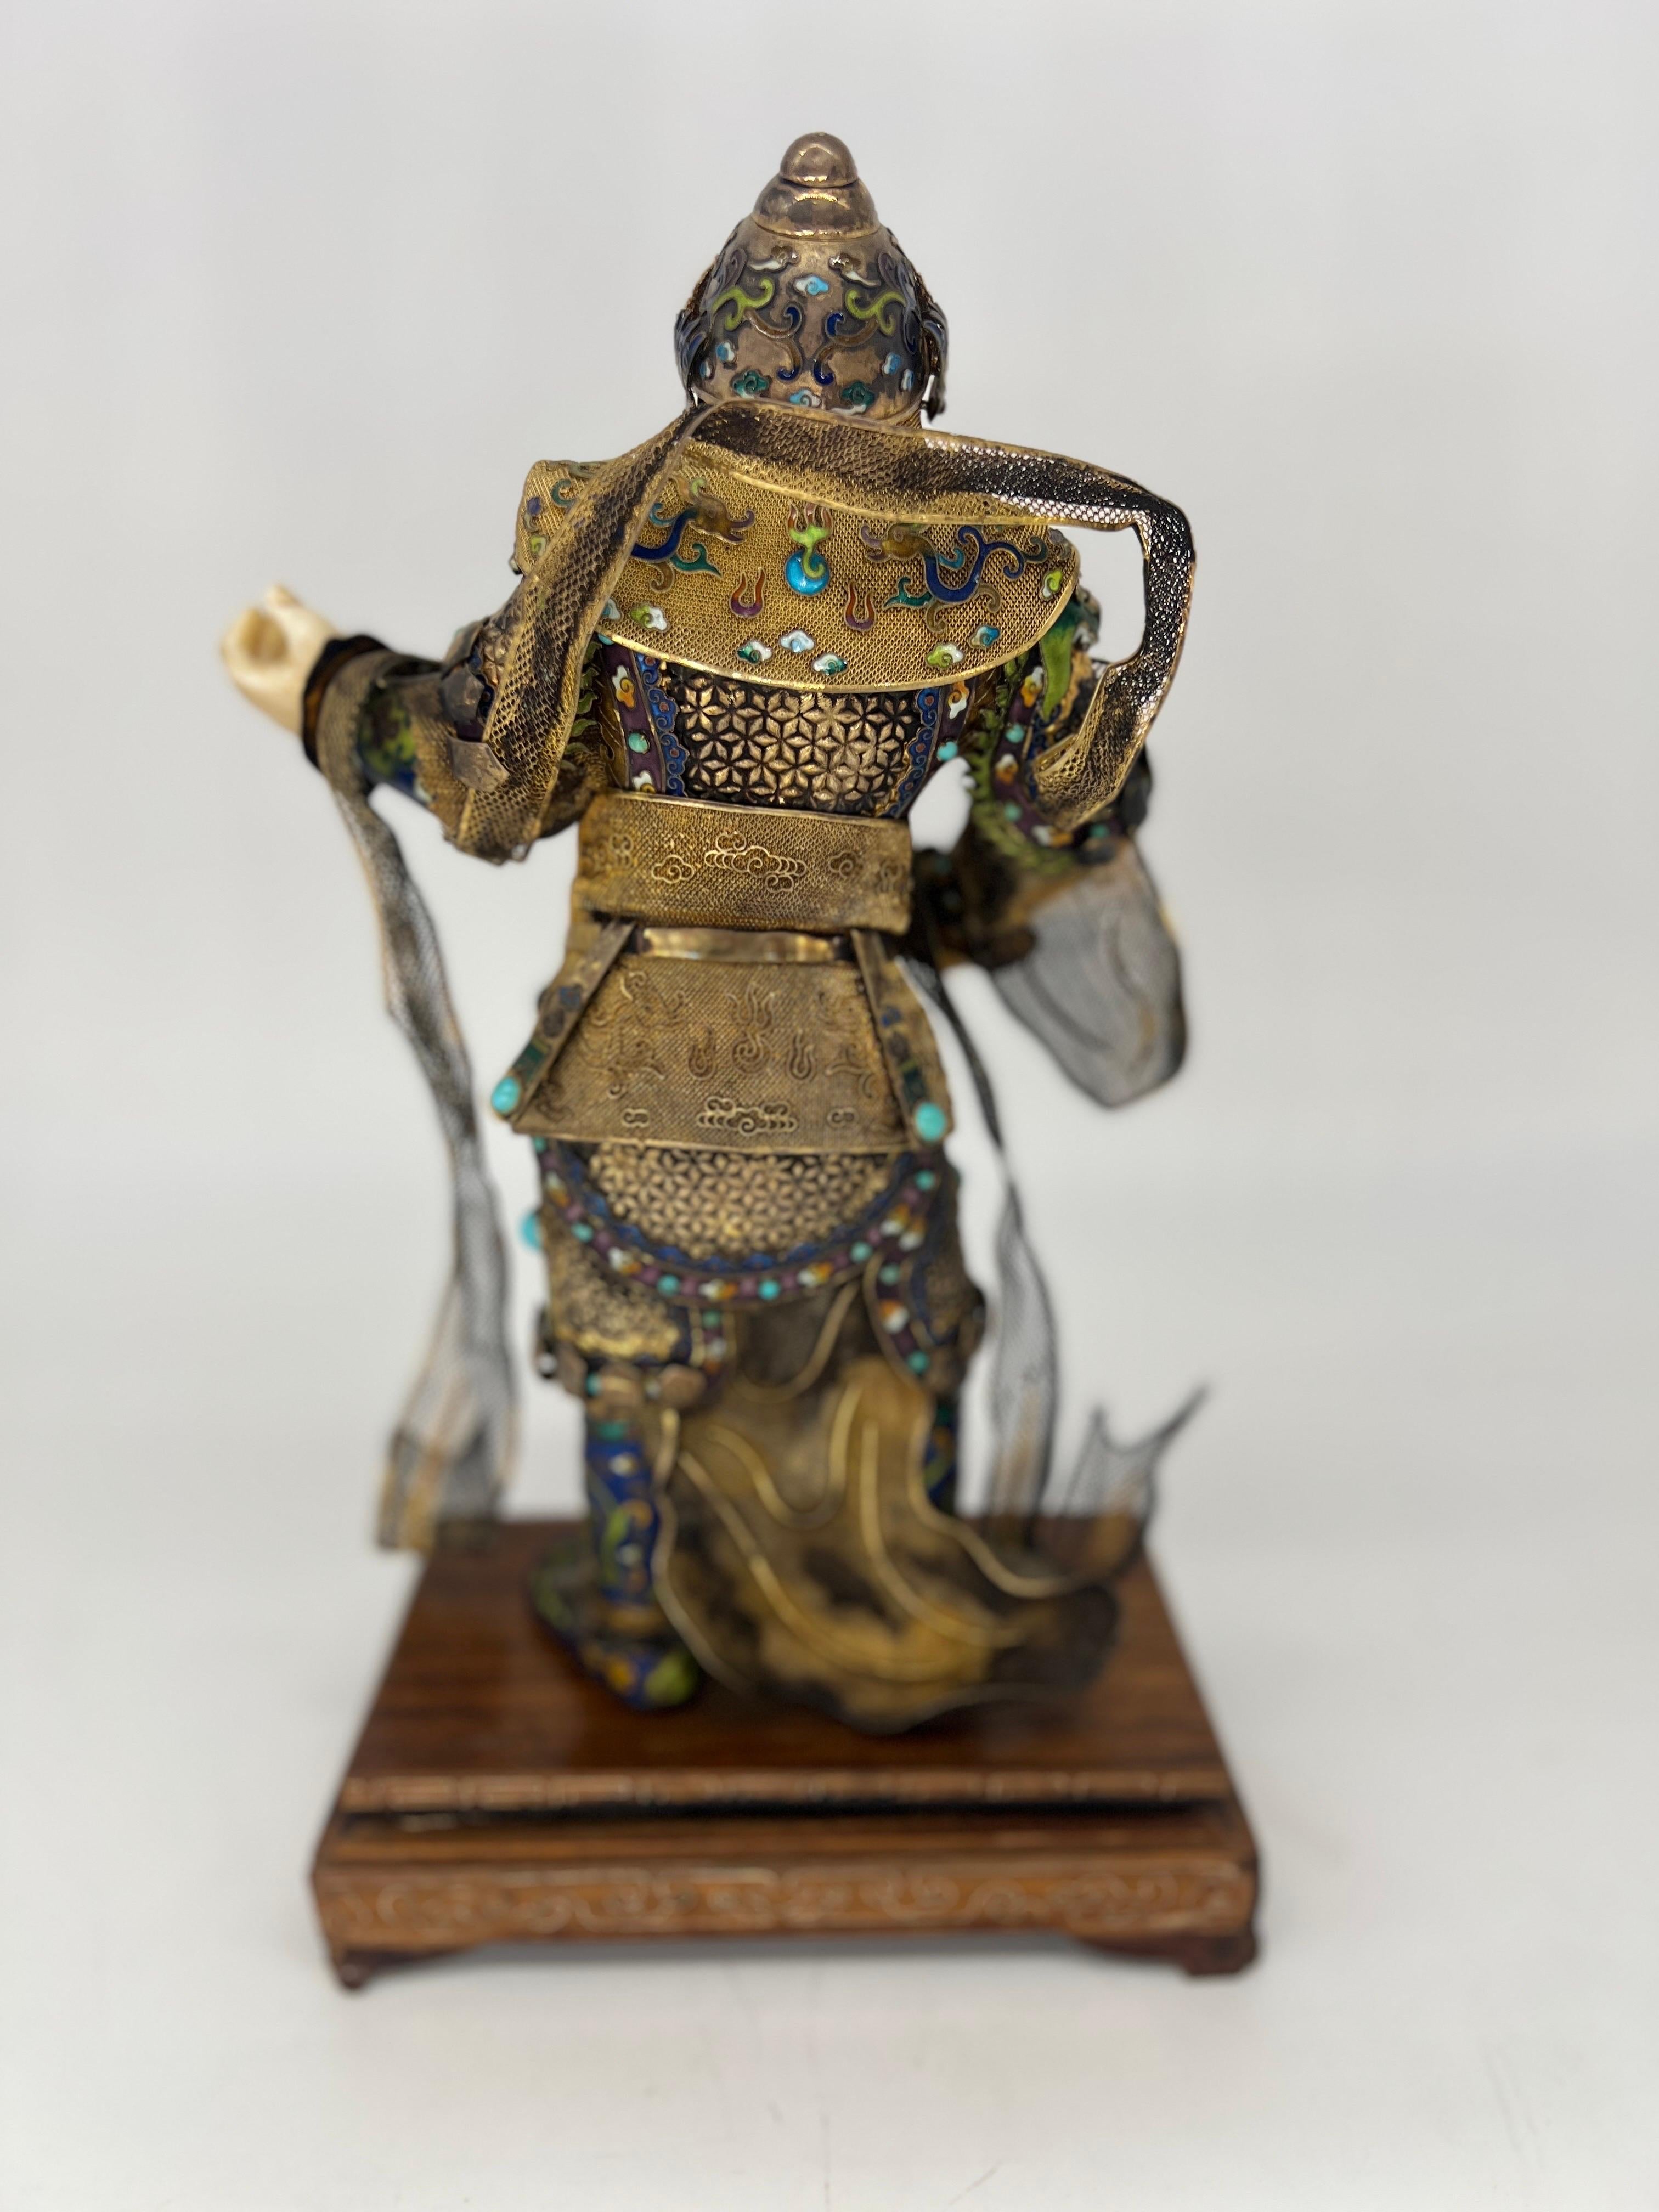 Antique Chinese Silver Gilt, Enamel & Turquoise Mounted Immortal Figurine For Sale 3